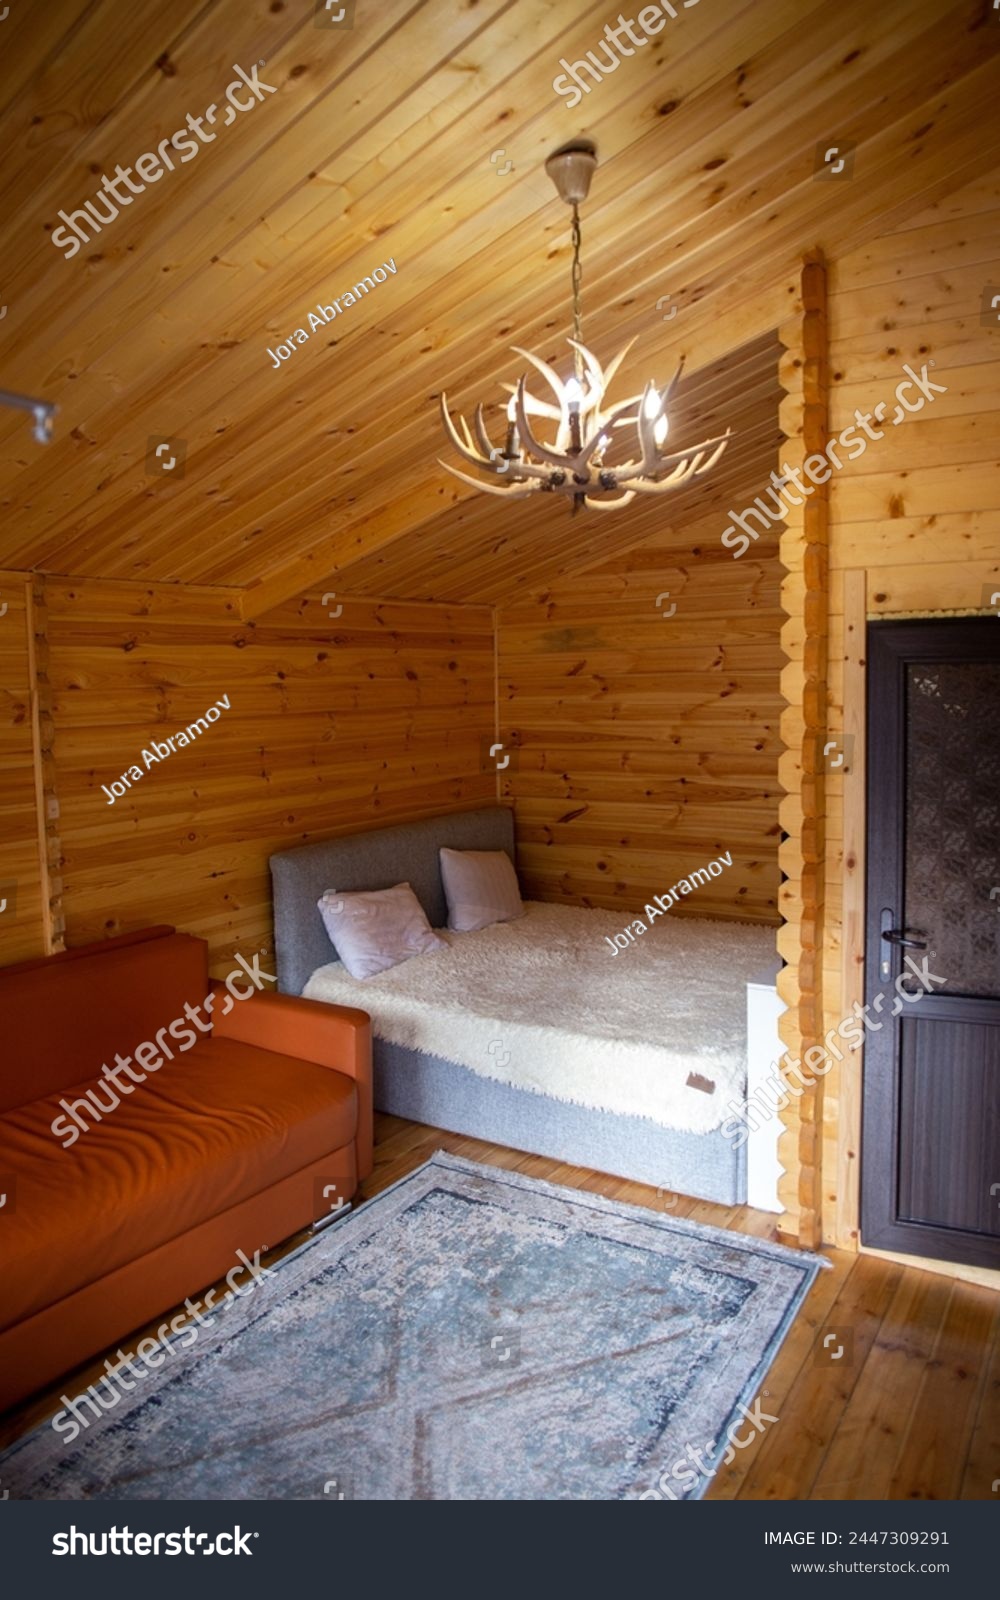 The cabins interior is paneled with wood and furnished with a bed, sofa, and armoire. A bearskin rug adds a touch of warmth to the space. #2447309291